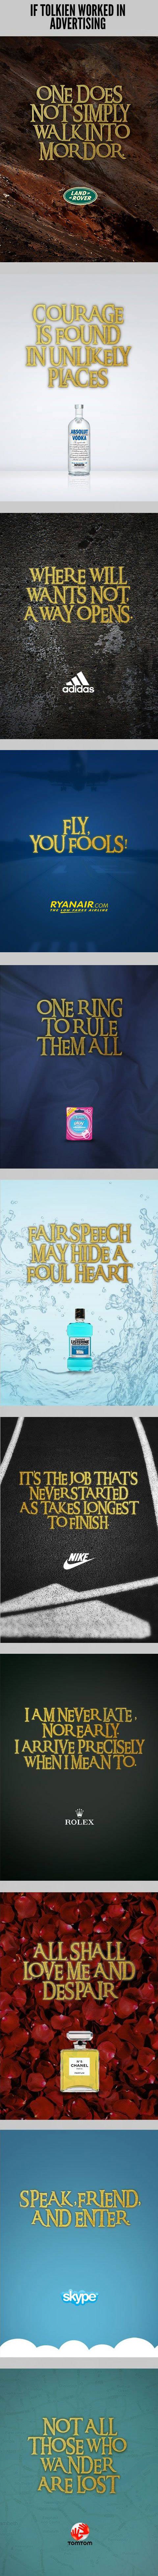 If+Tolkien+worked+in+advertising.